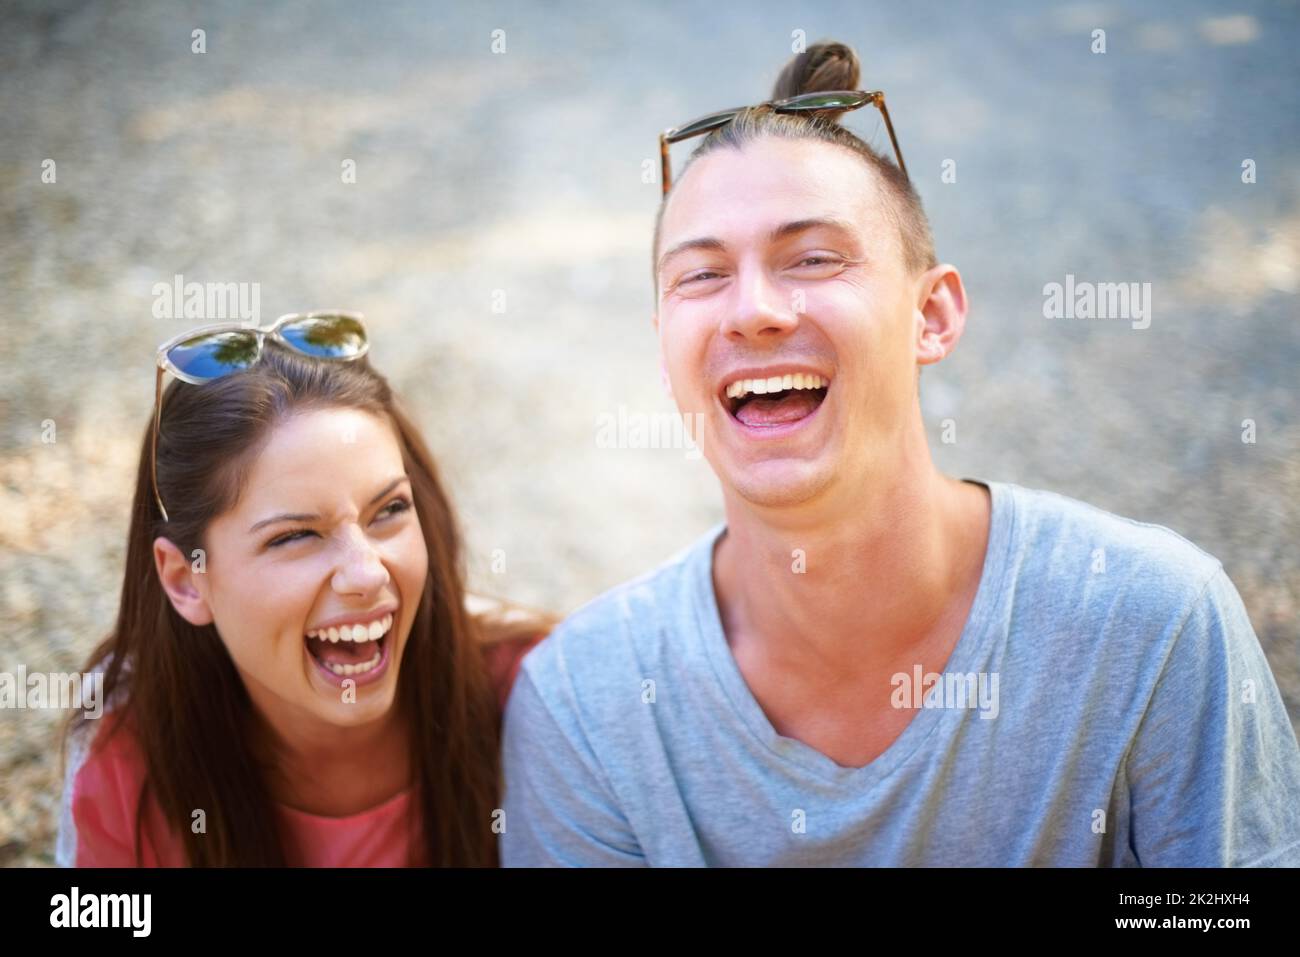 Young at heart. Two young people smiling happily as they sit outside. Stock Photo